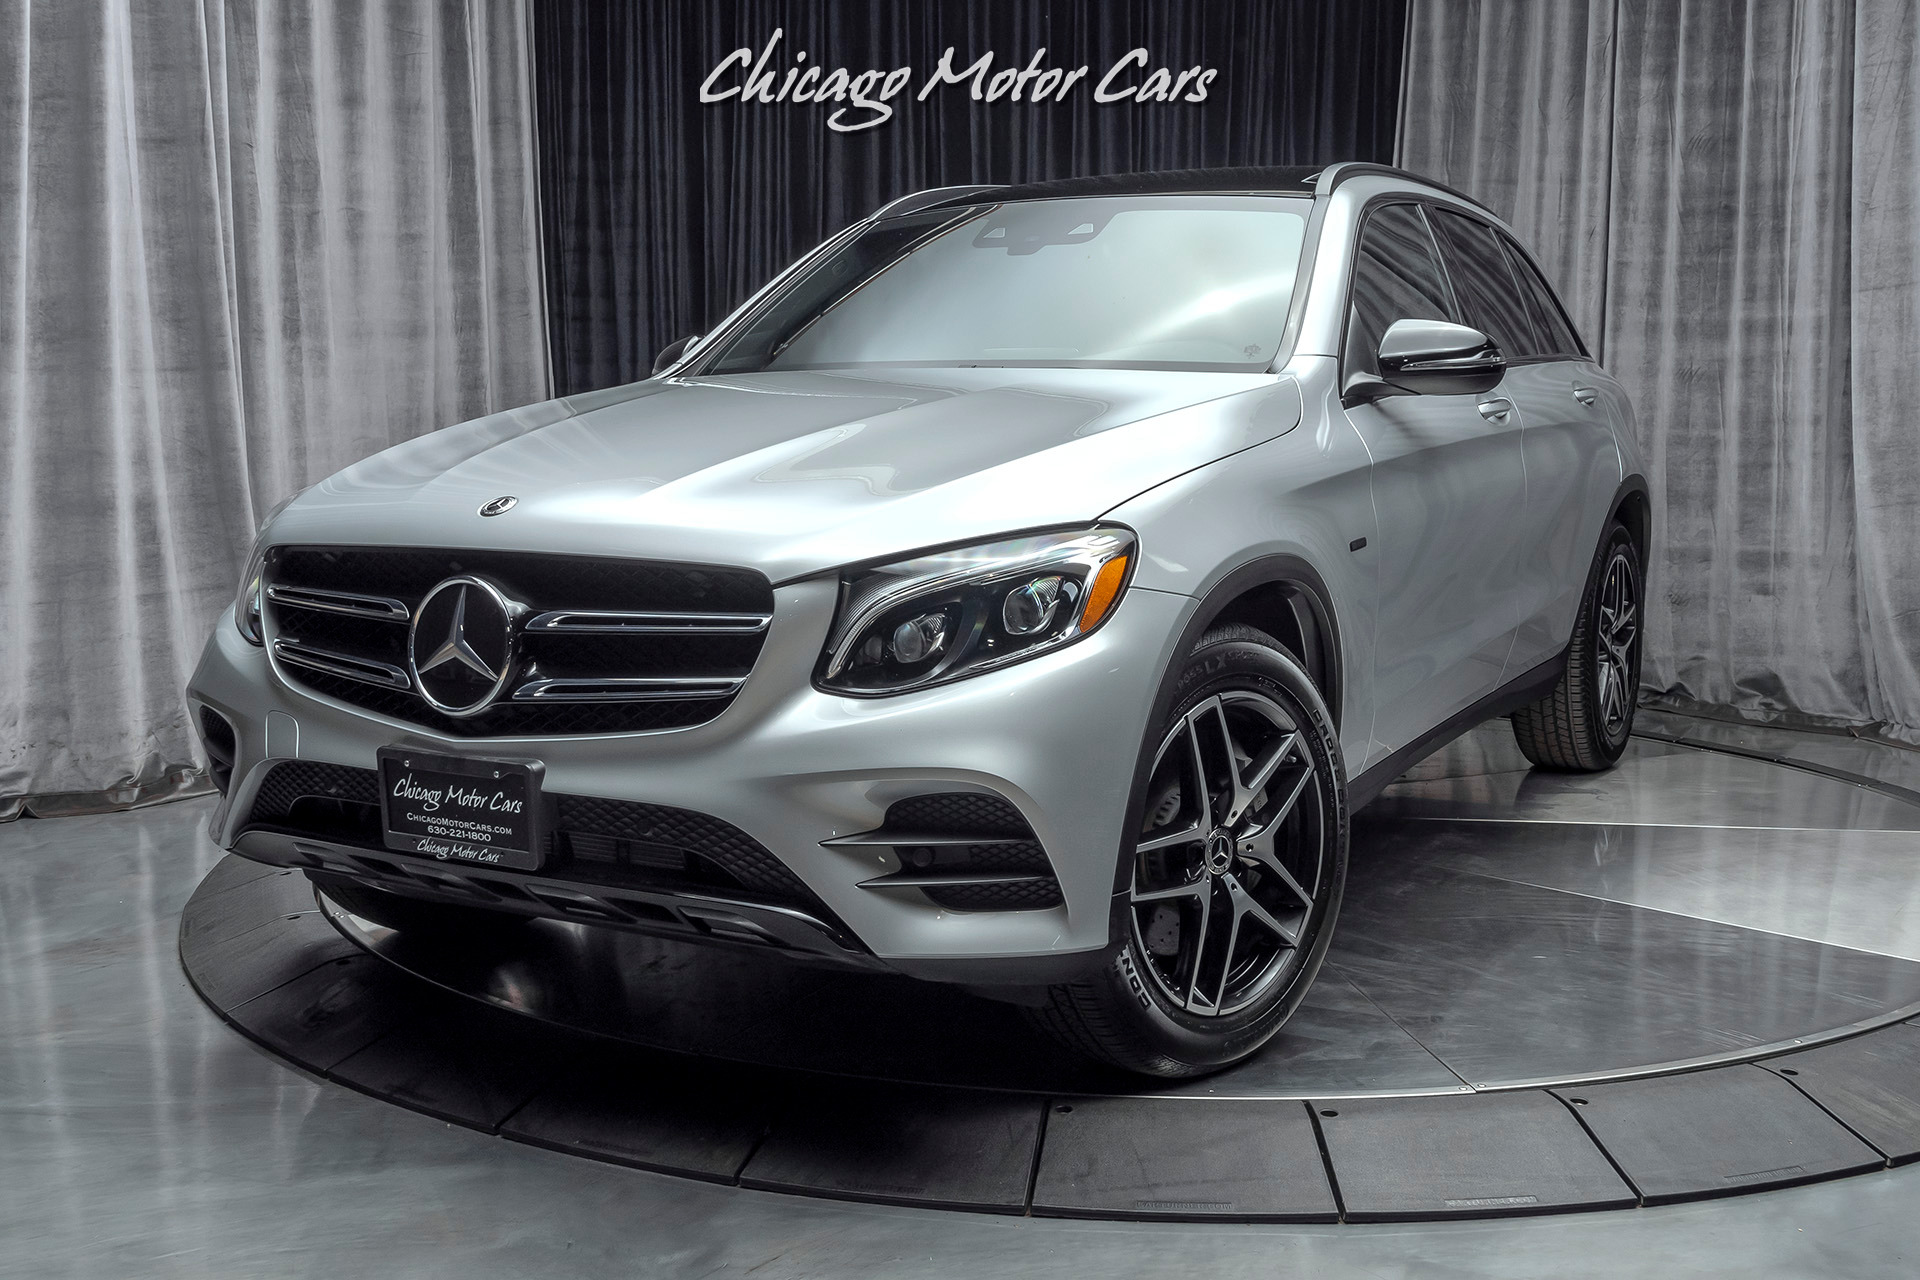 Used-2019-Mercedes-Benz-GLC350e-4-Matic-GLC-350e-4MATIC-SUV-MSRP-65k-ONLY-5200-MILES